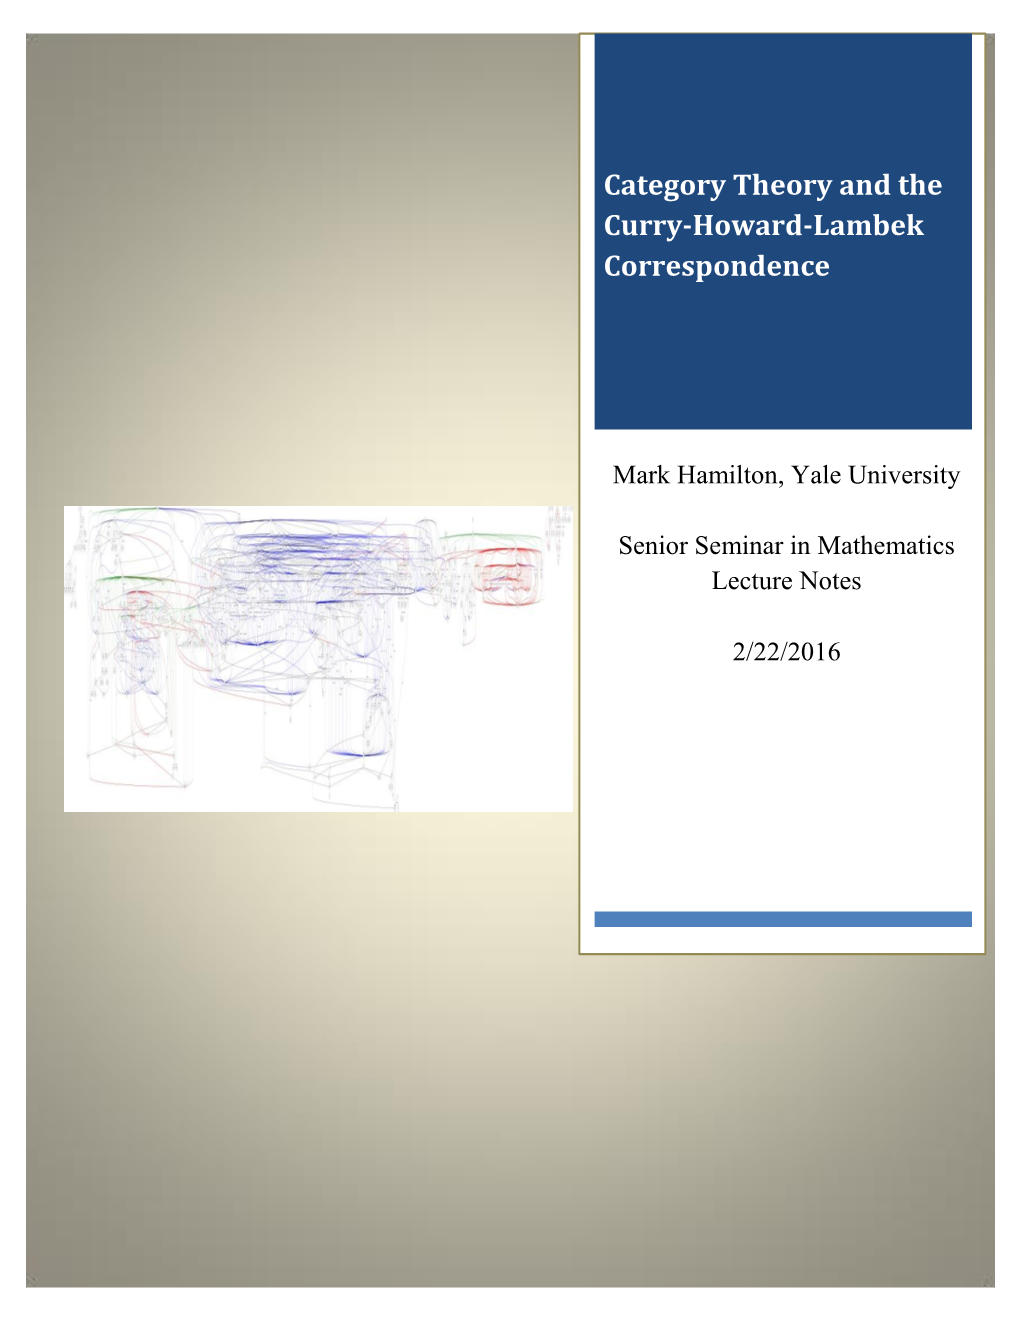 Category Theory and the Curry-Howard-Lambek Correspondence